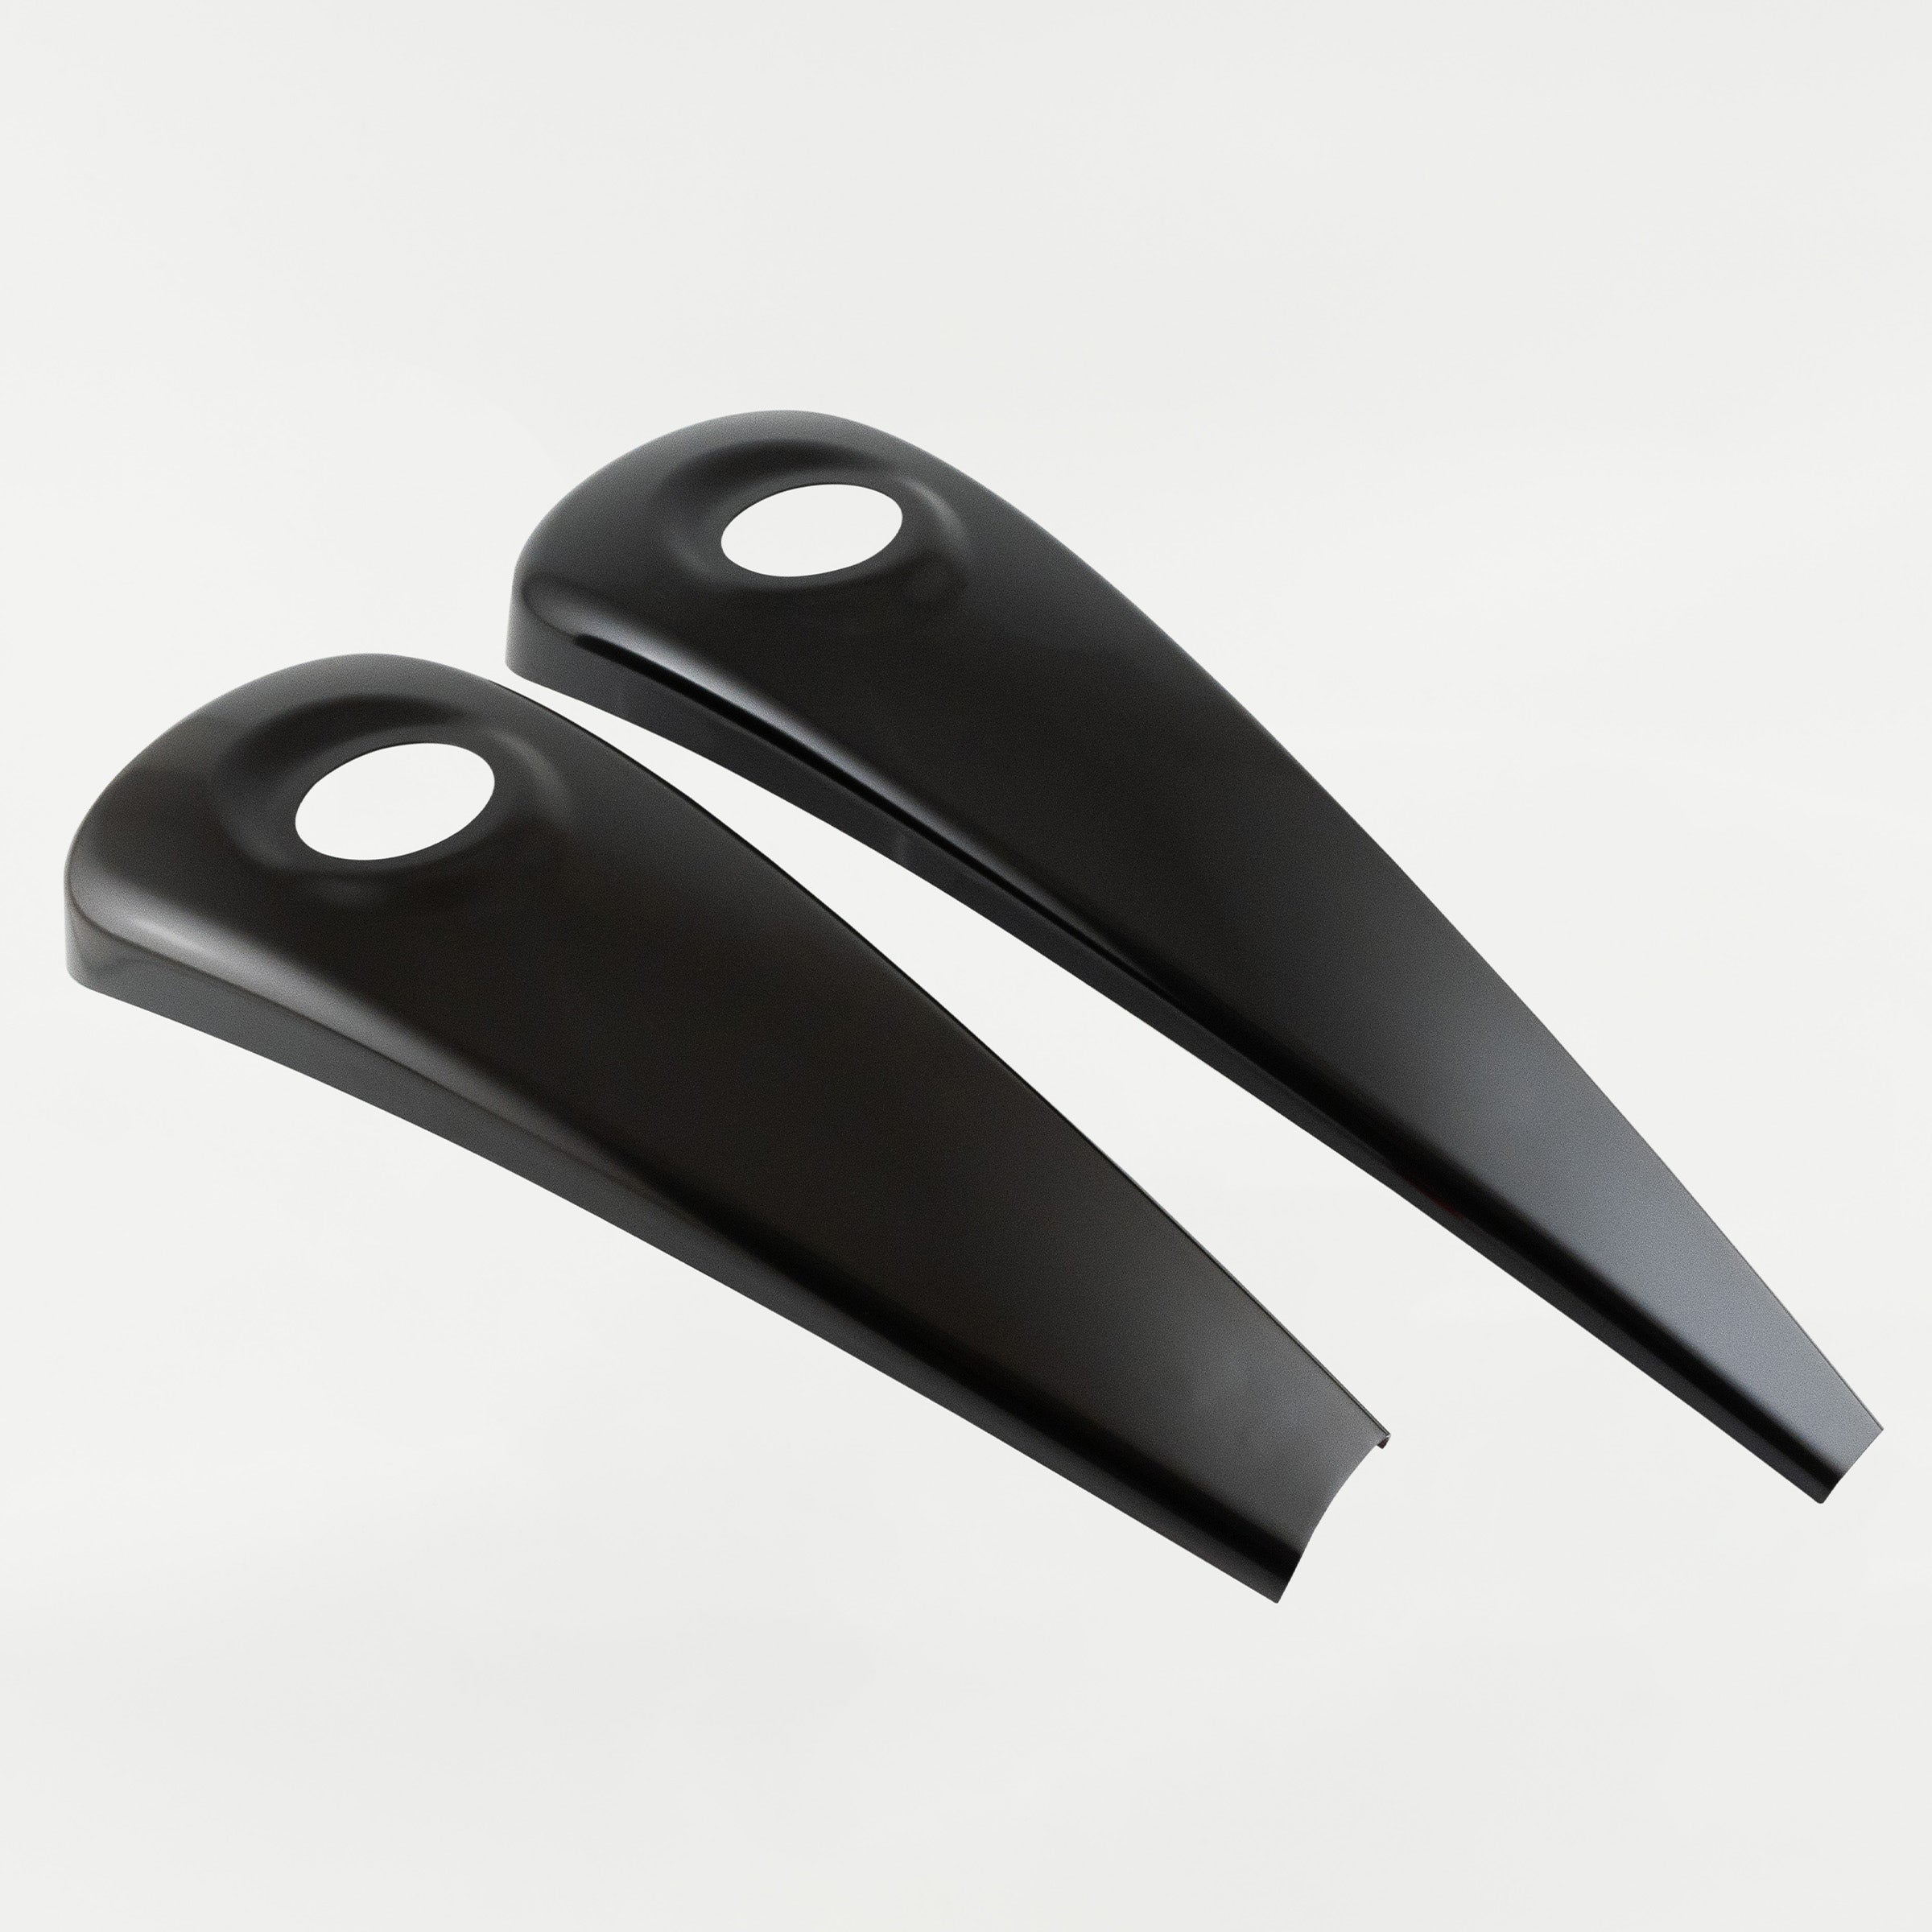 Stock length verses Extended Curvaceous Metal Dash for 2008 - 2024 FLH, FLTR Motorcycles(Stock Length (left) vs. Extended (right) Curvaceous Dash)